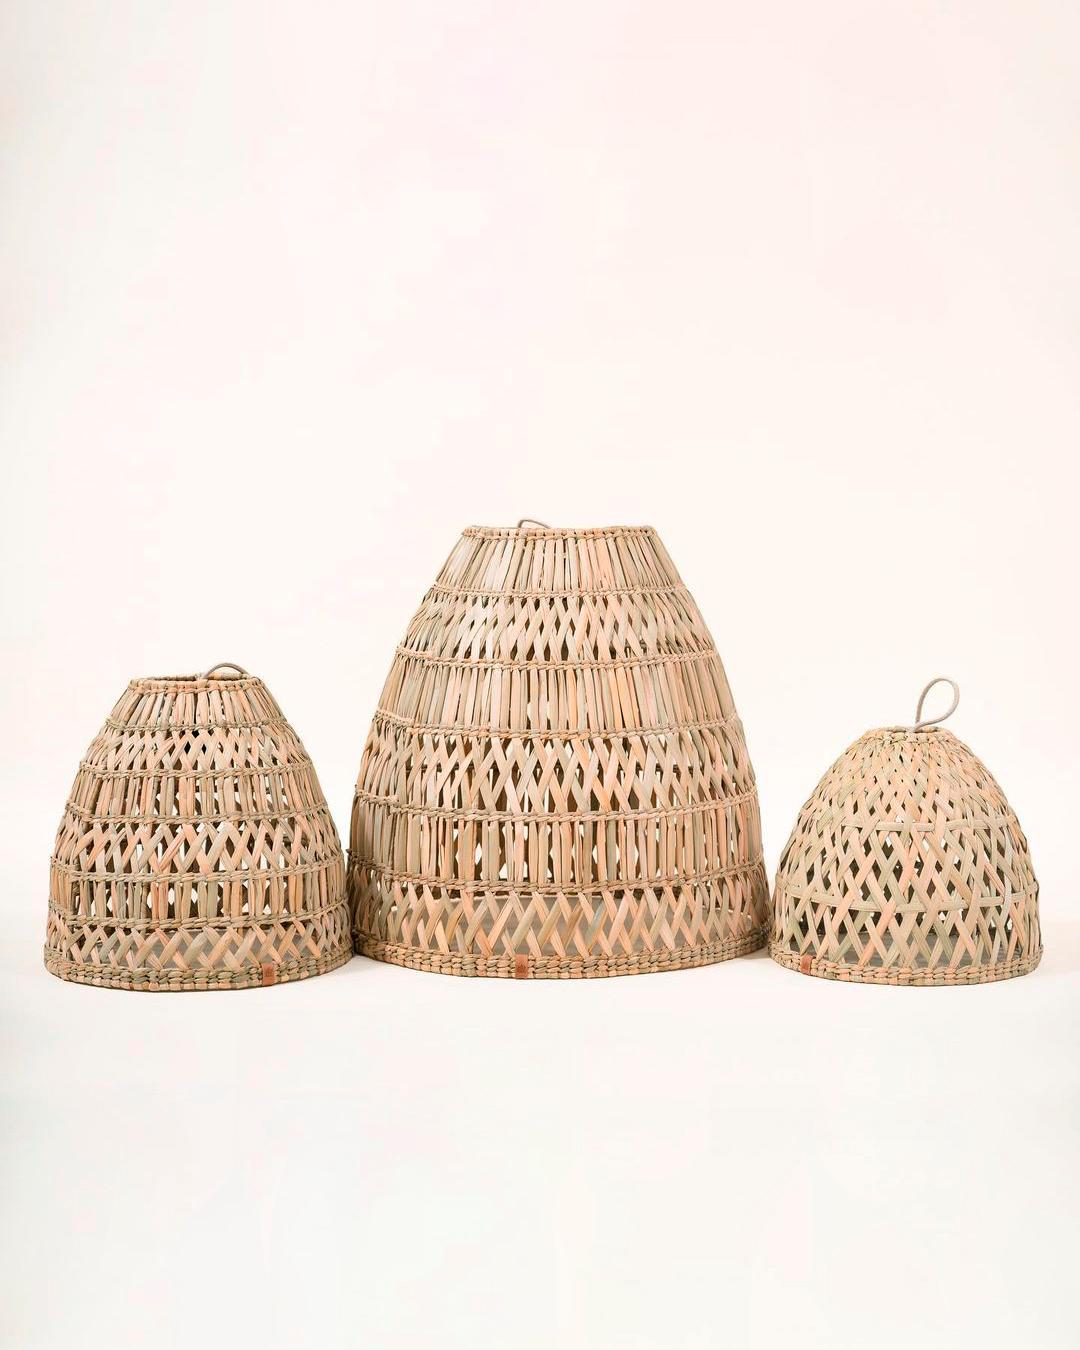 Maruata Handwoven Dried Palm Pendant Lampshade 22inx24in For Sale 1